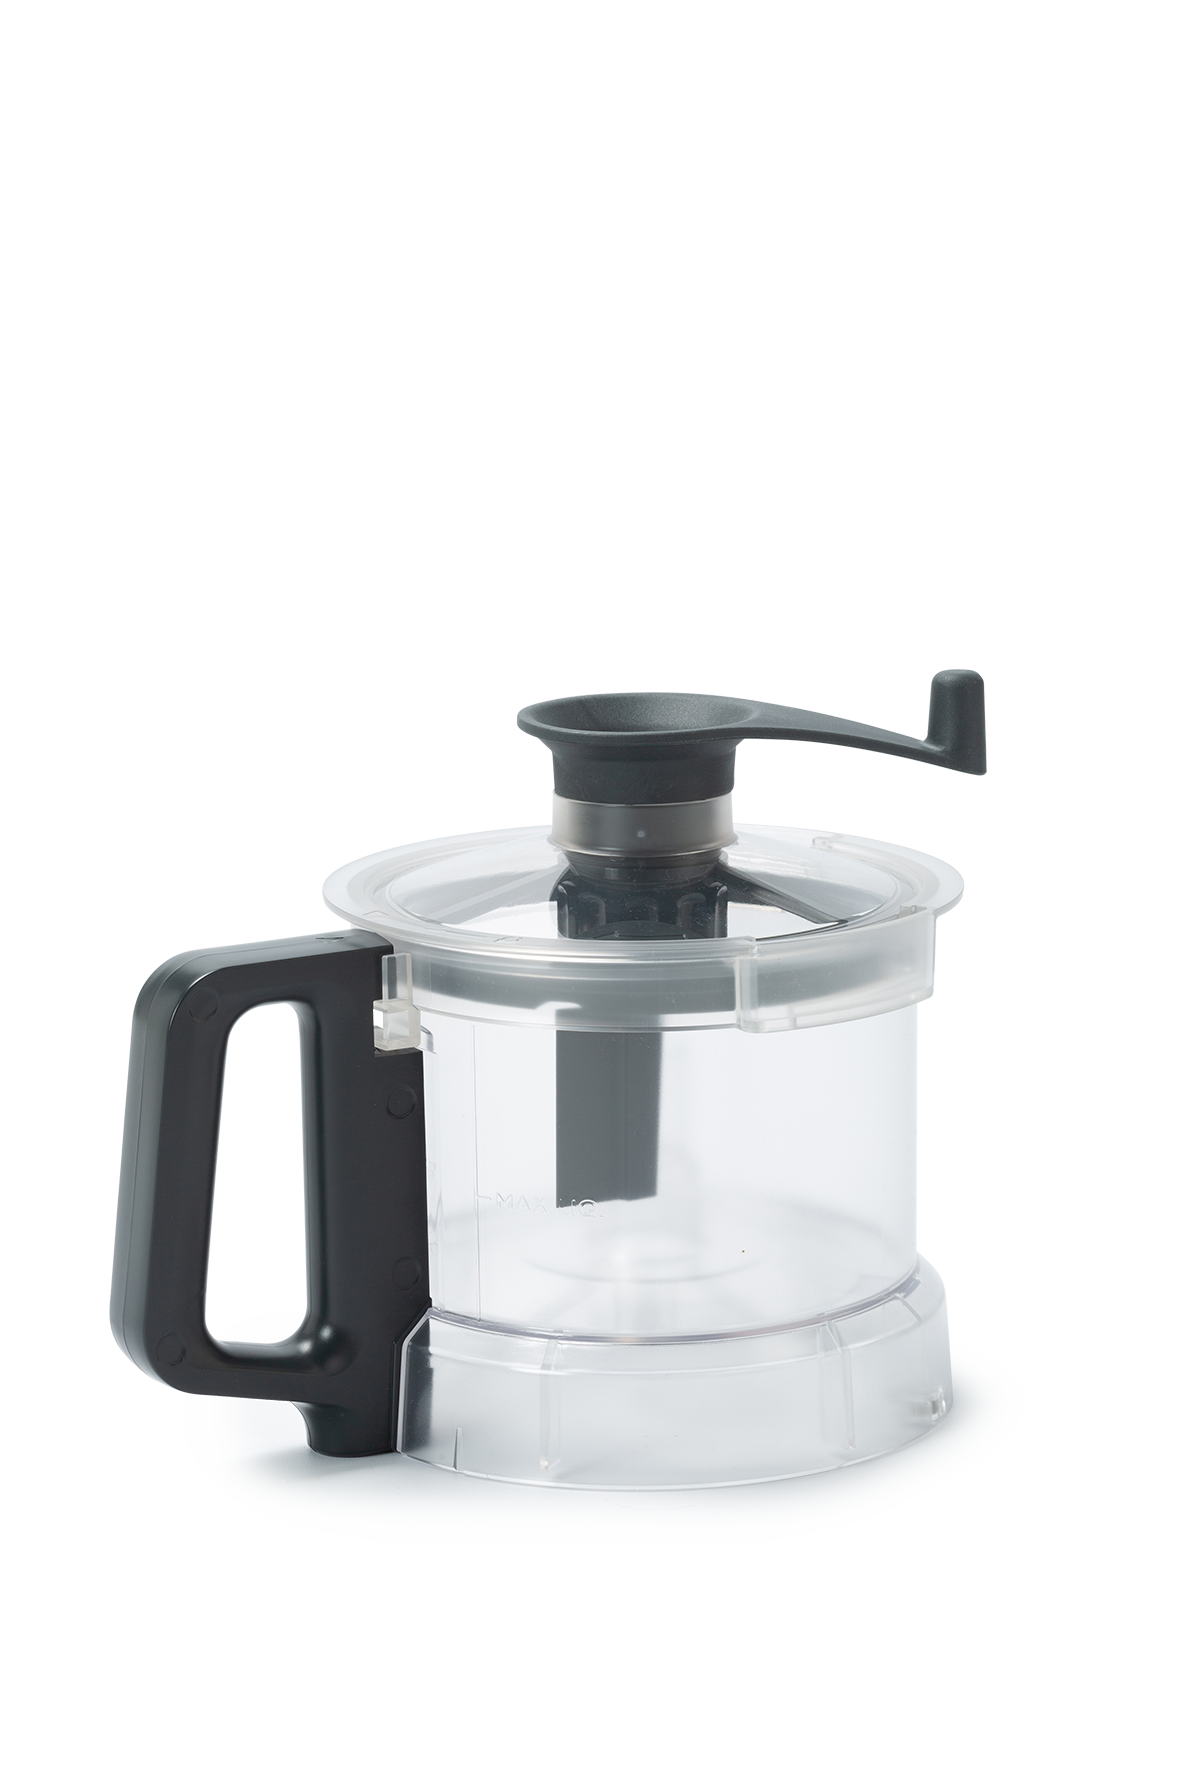 Electrolux Transparent Co-polyester Bowl for 2.6lt Cutter Mixer - 650229